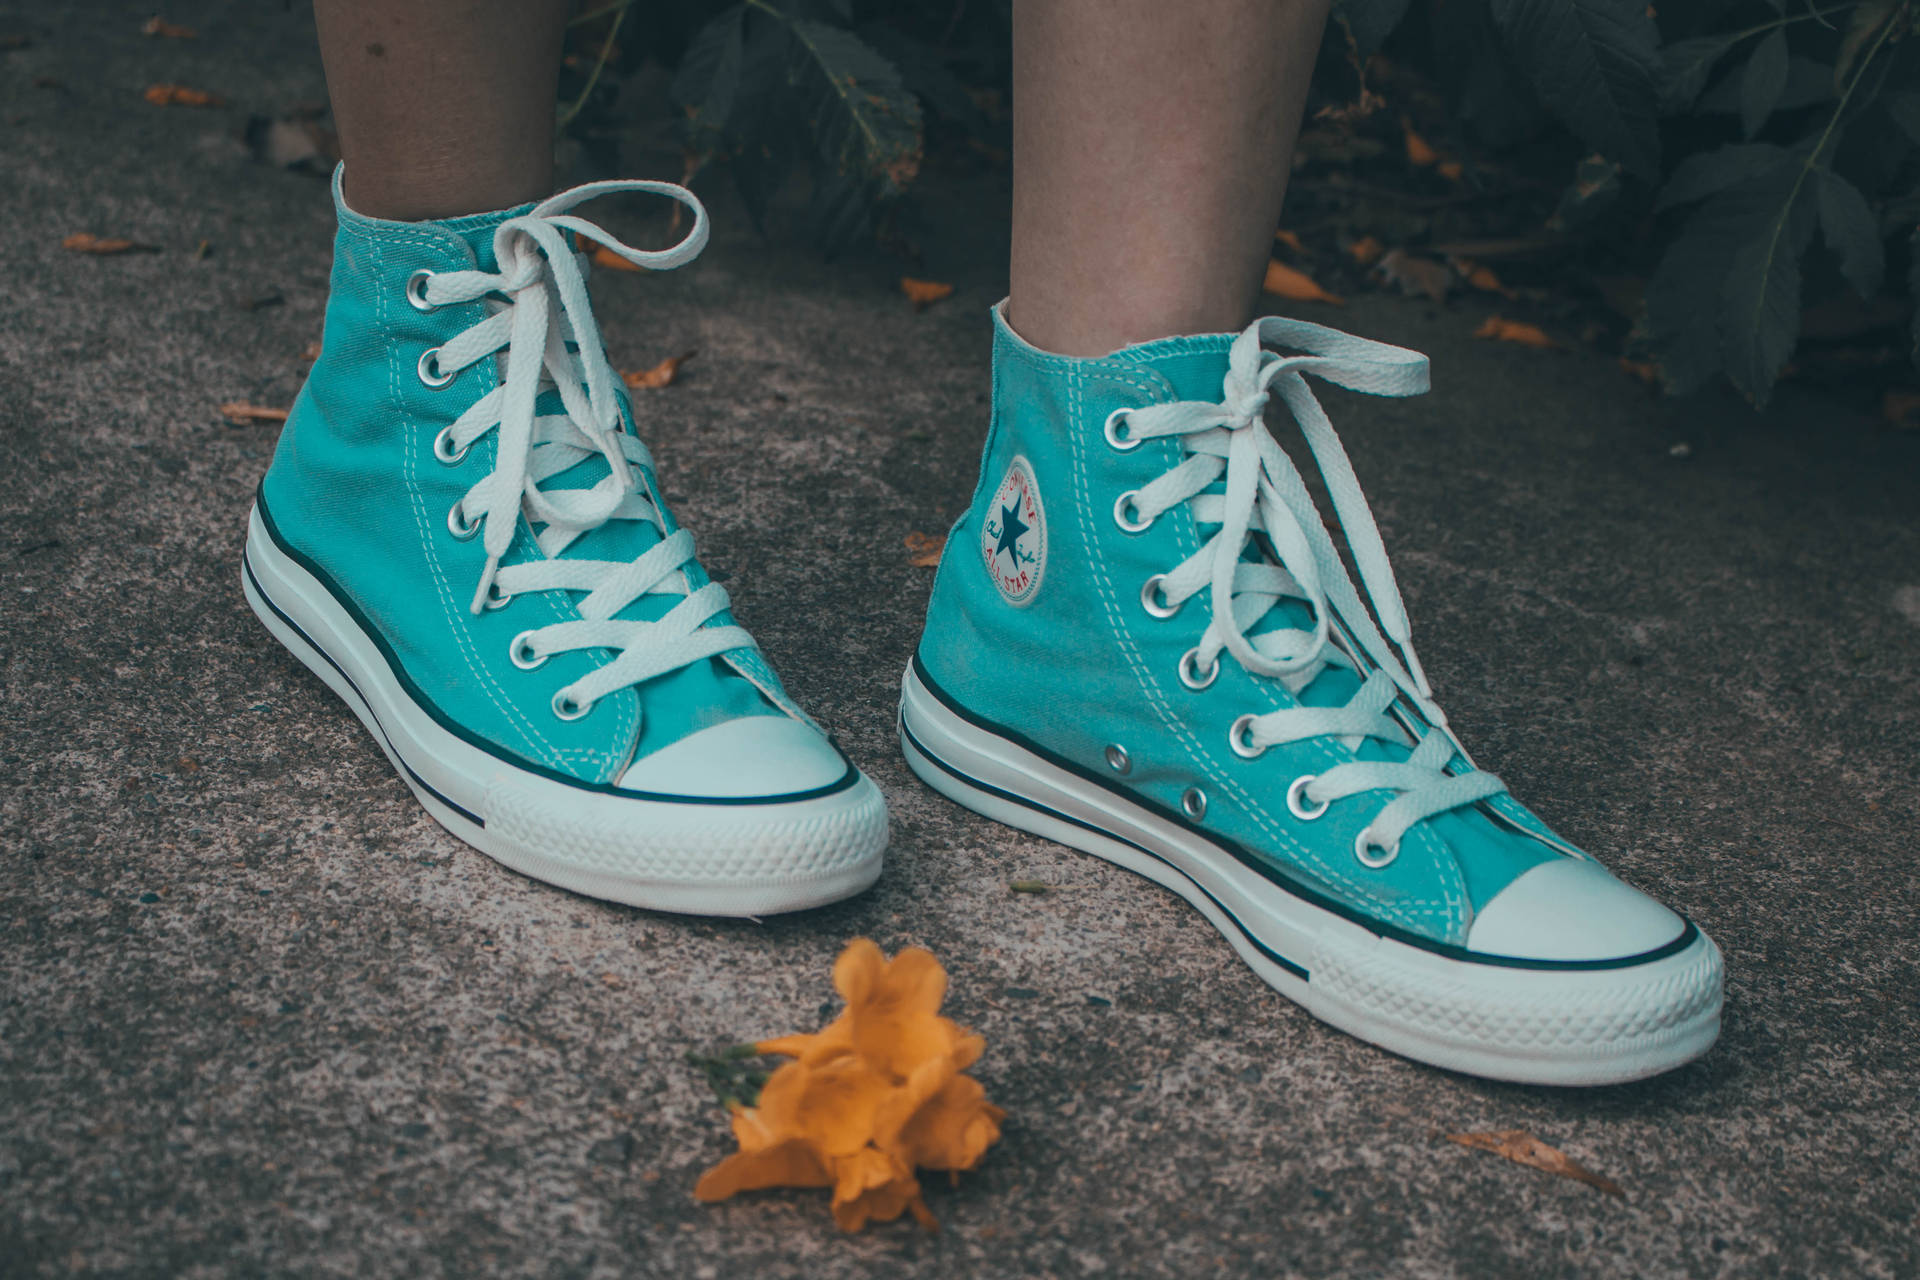 (translation: Patterned Wallpaper Featuring Teal Converse All-star High Top Sneakers.) Wallpaper